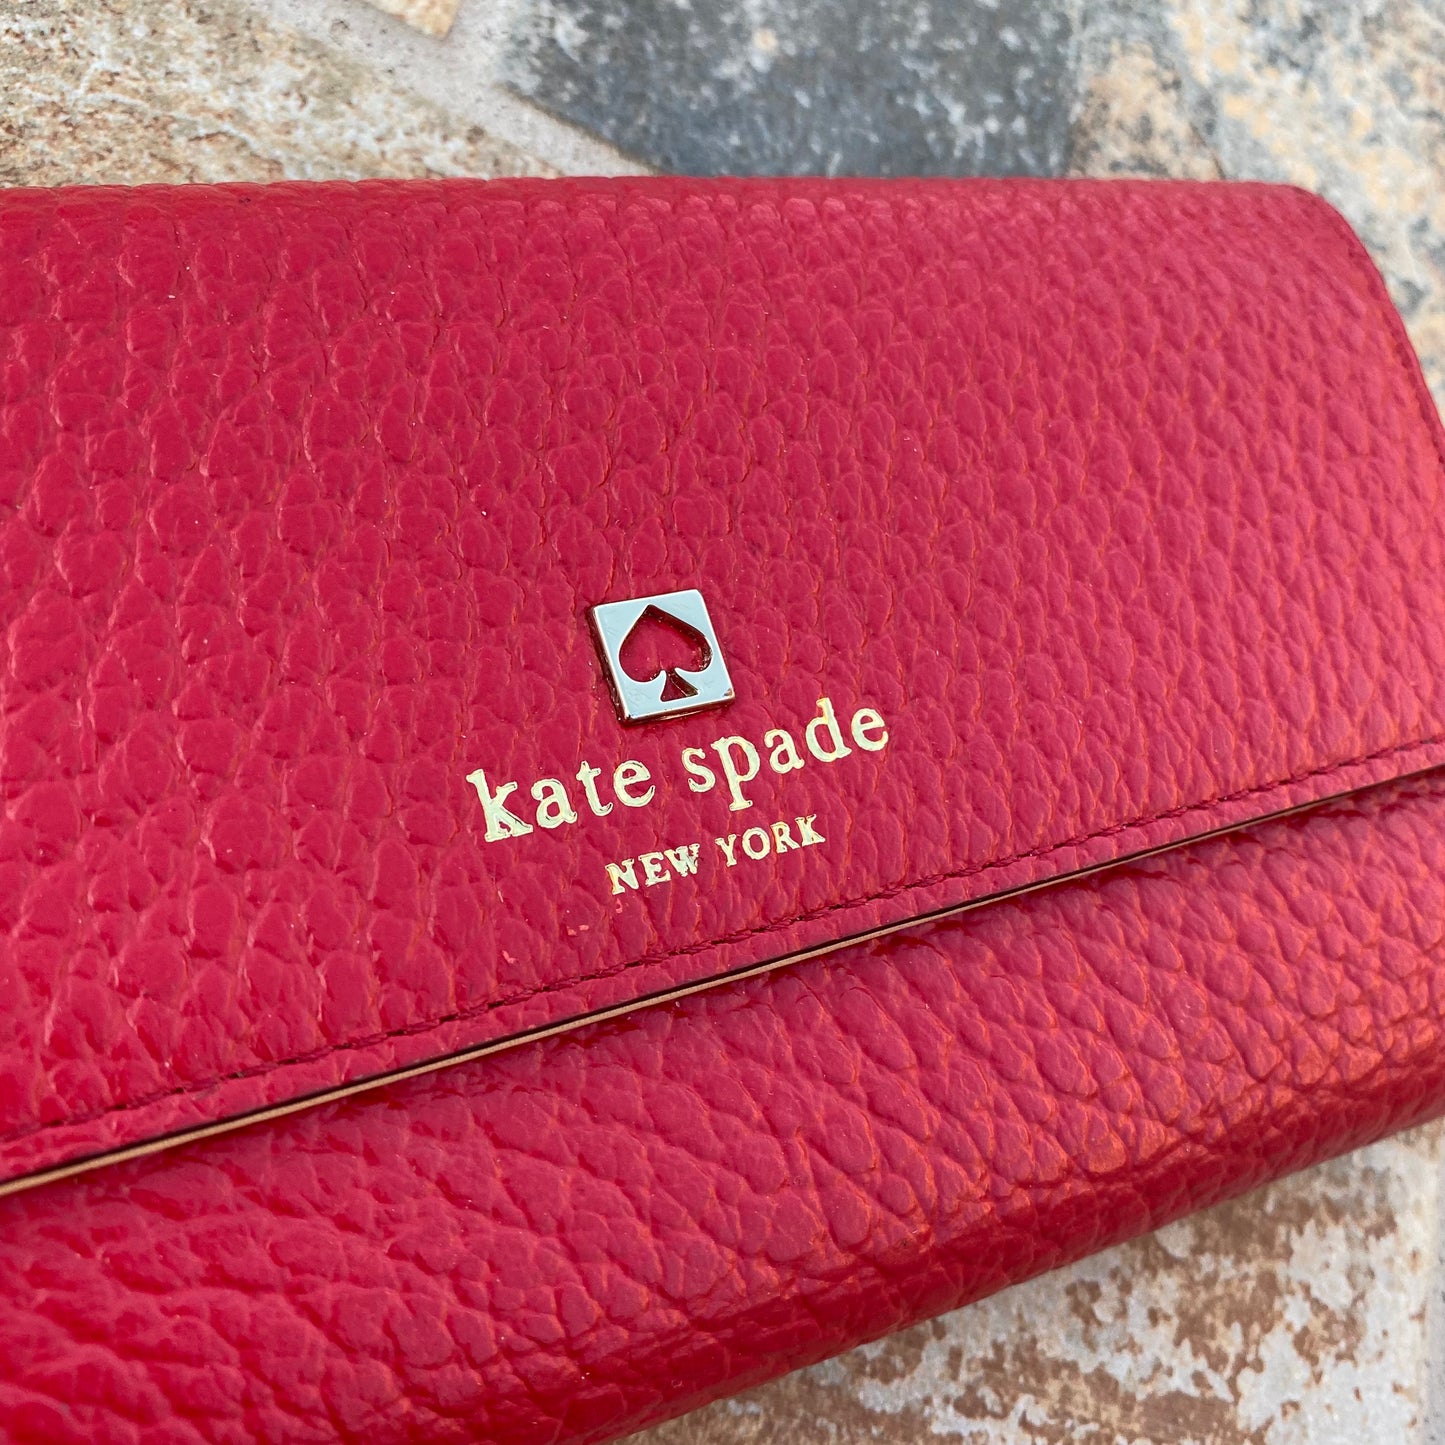 Kate Spade New York Pebbled Leather Continental Wallet